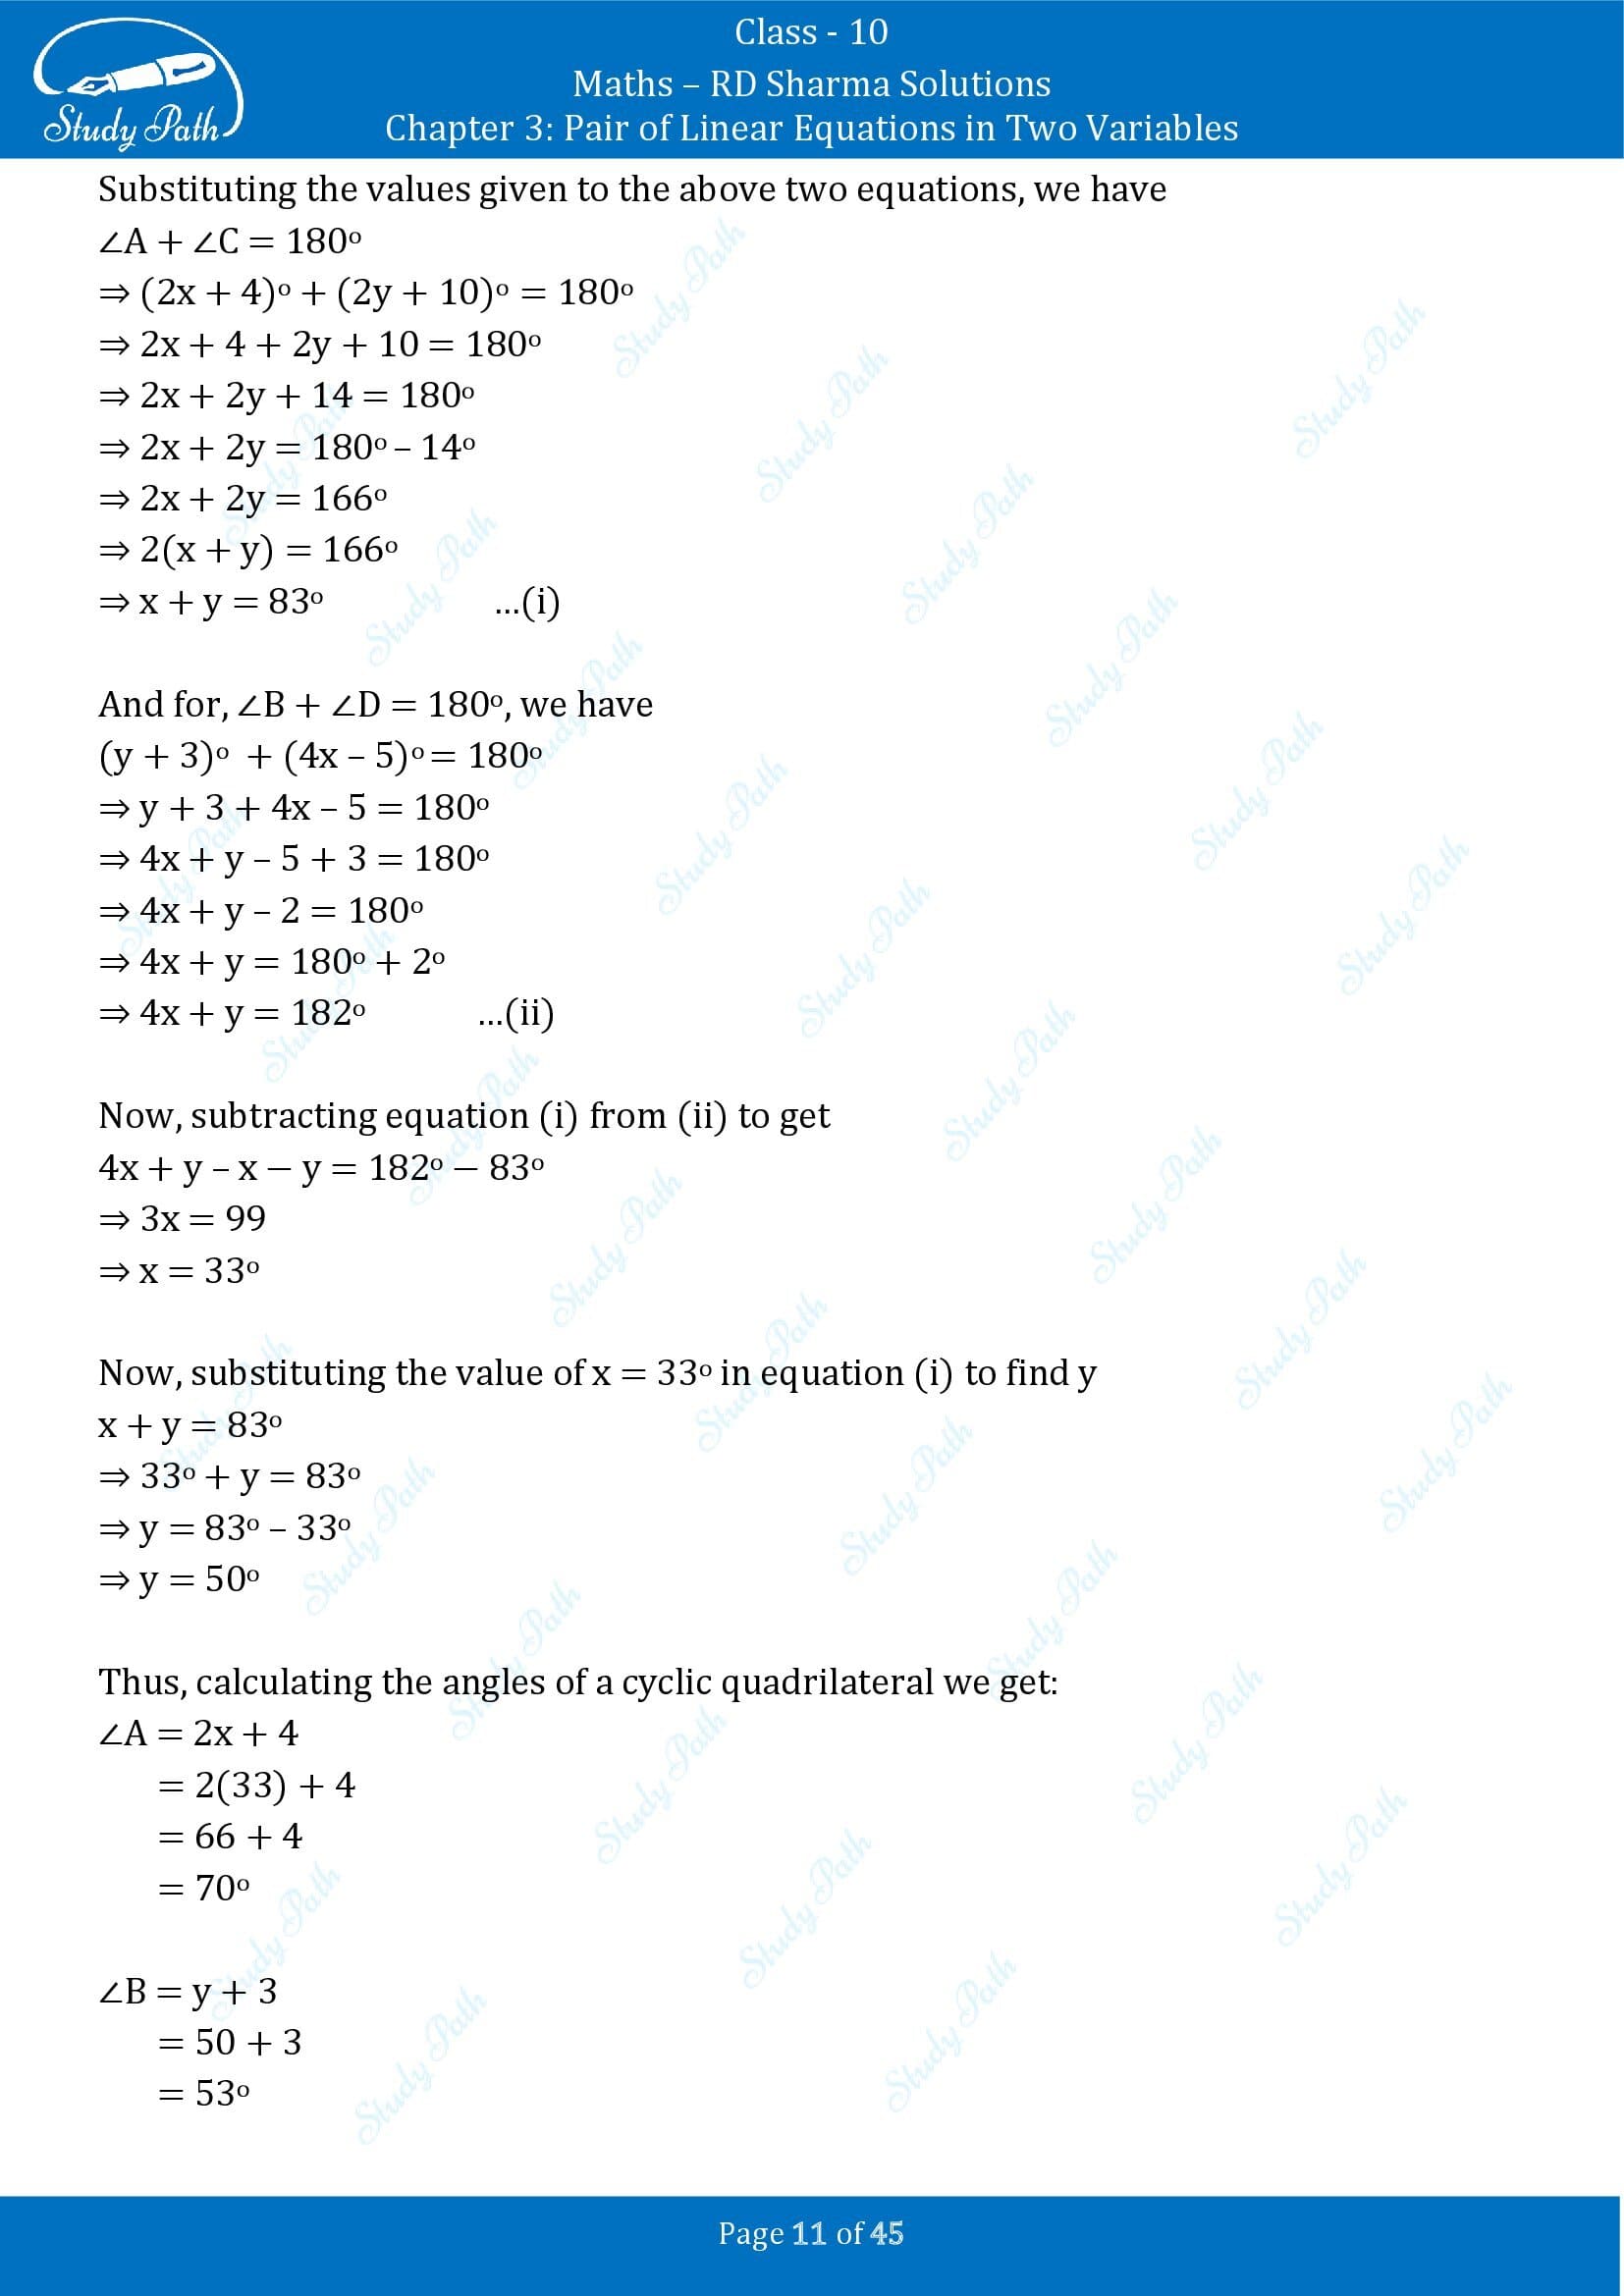 RD Sharma Solutions Class 10 Chapter 3 Pair of Linear Equations in Two Variables Exercise 3.11 00011